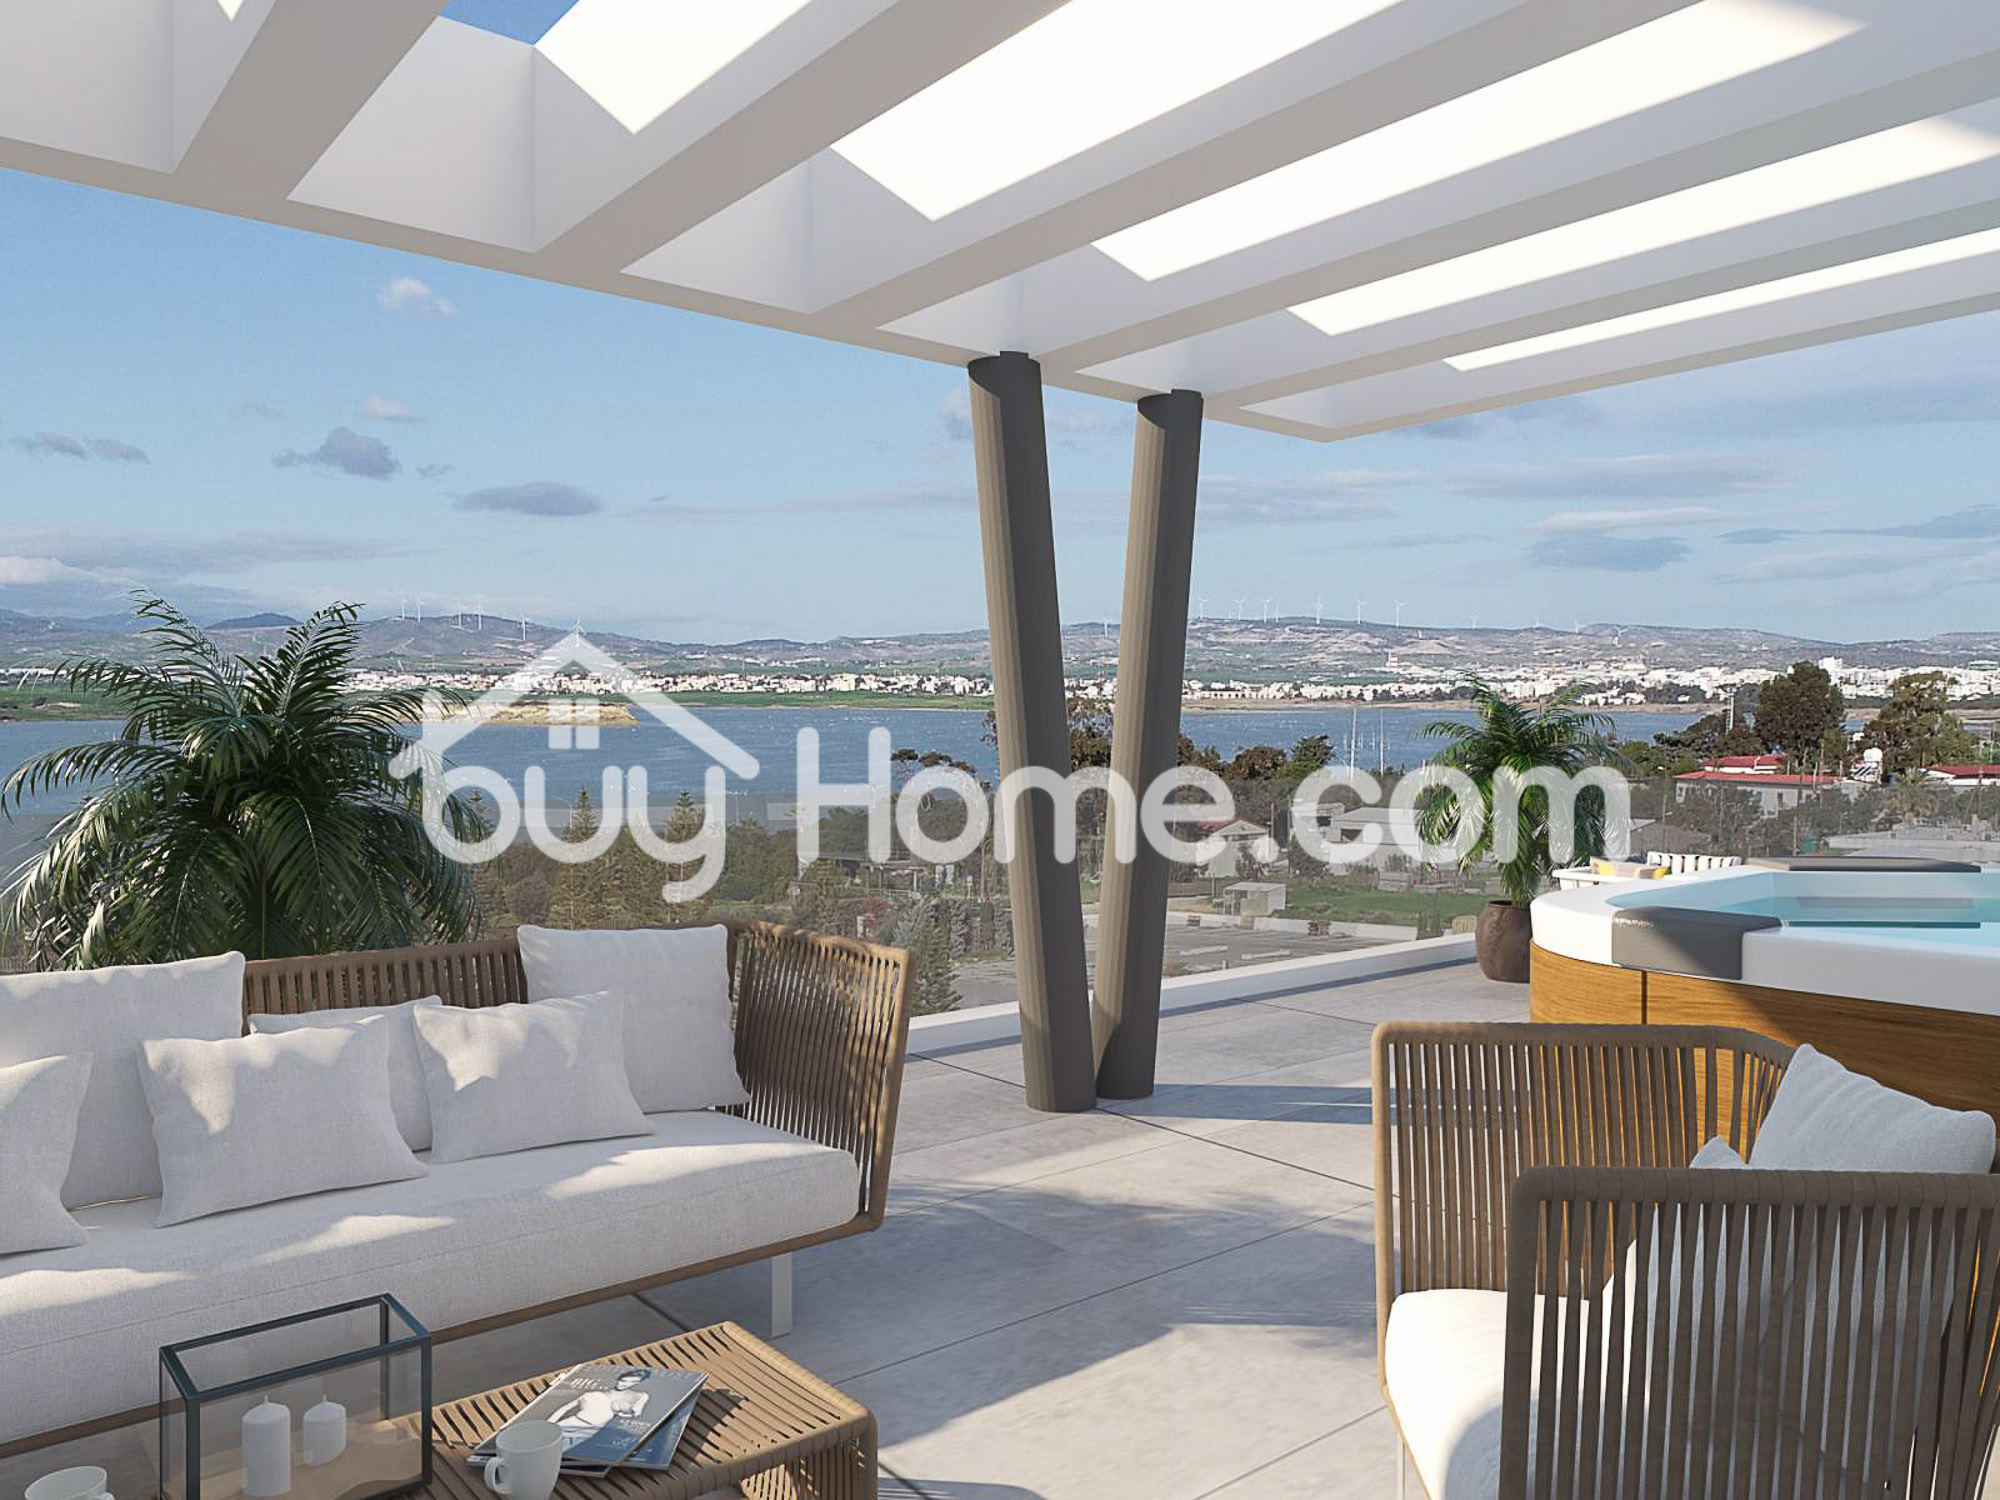 2 BDR APARTMENT | BuyHome